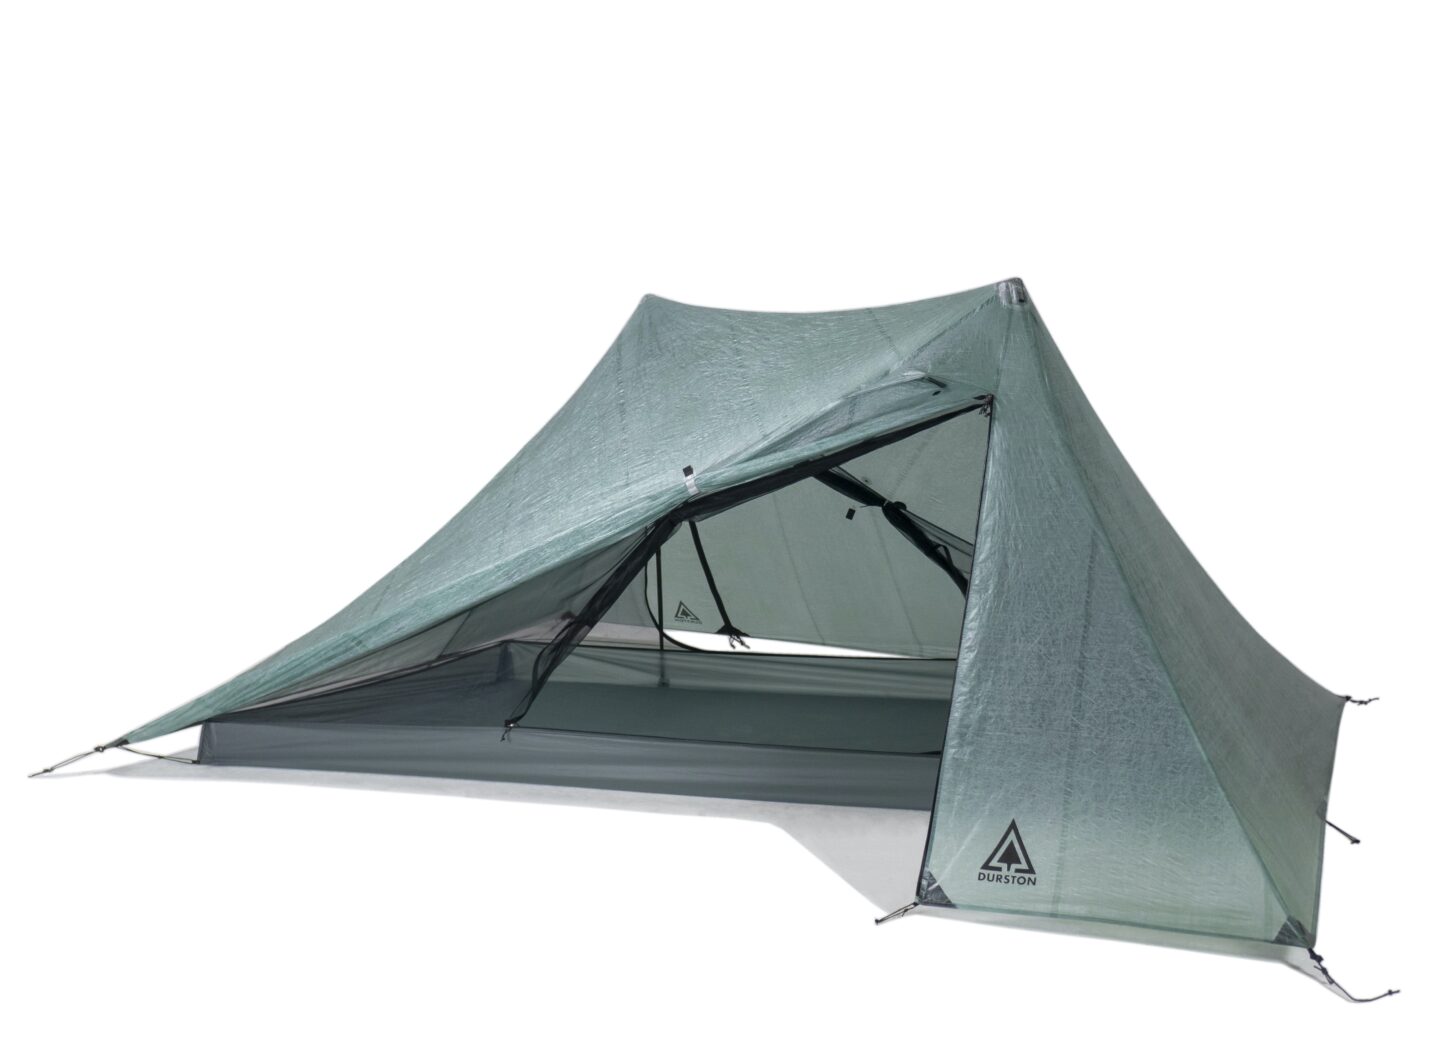 A tent is pictured with one door open.